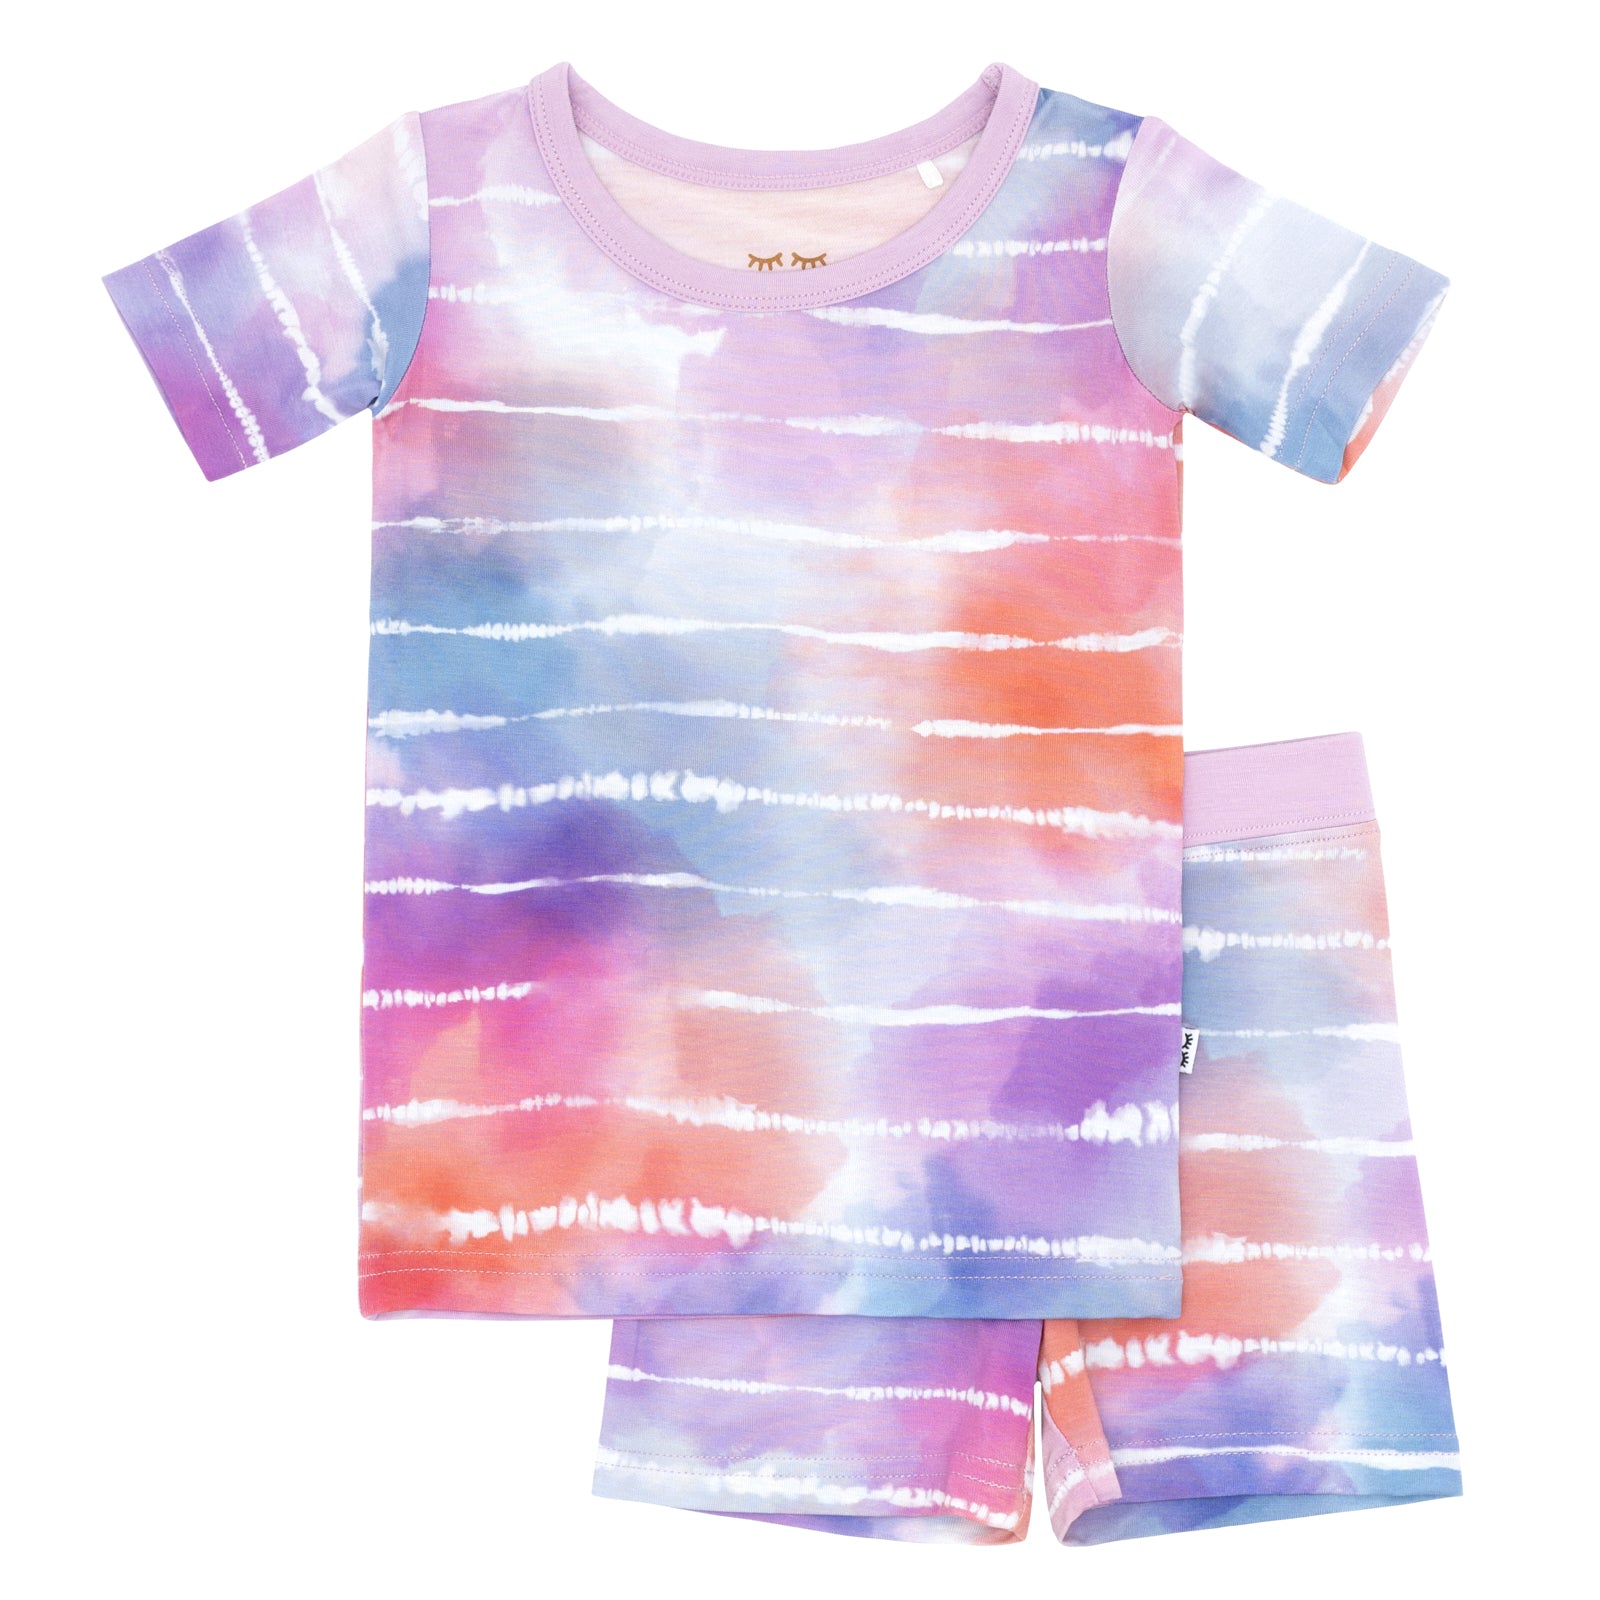 Flat lay image of a Pastel Tie Dye Dreams two-piece short sleeve & shorts pajama set